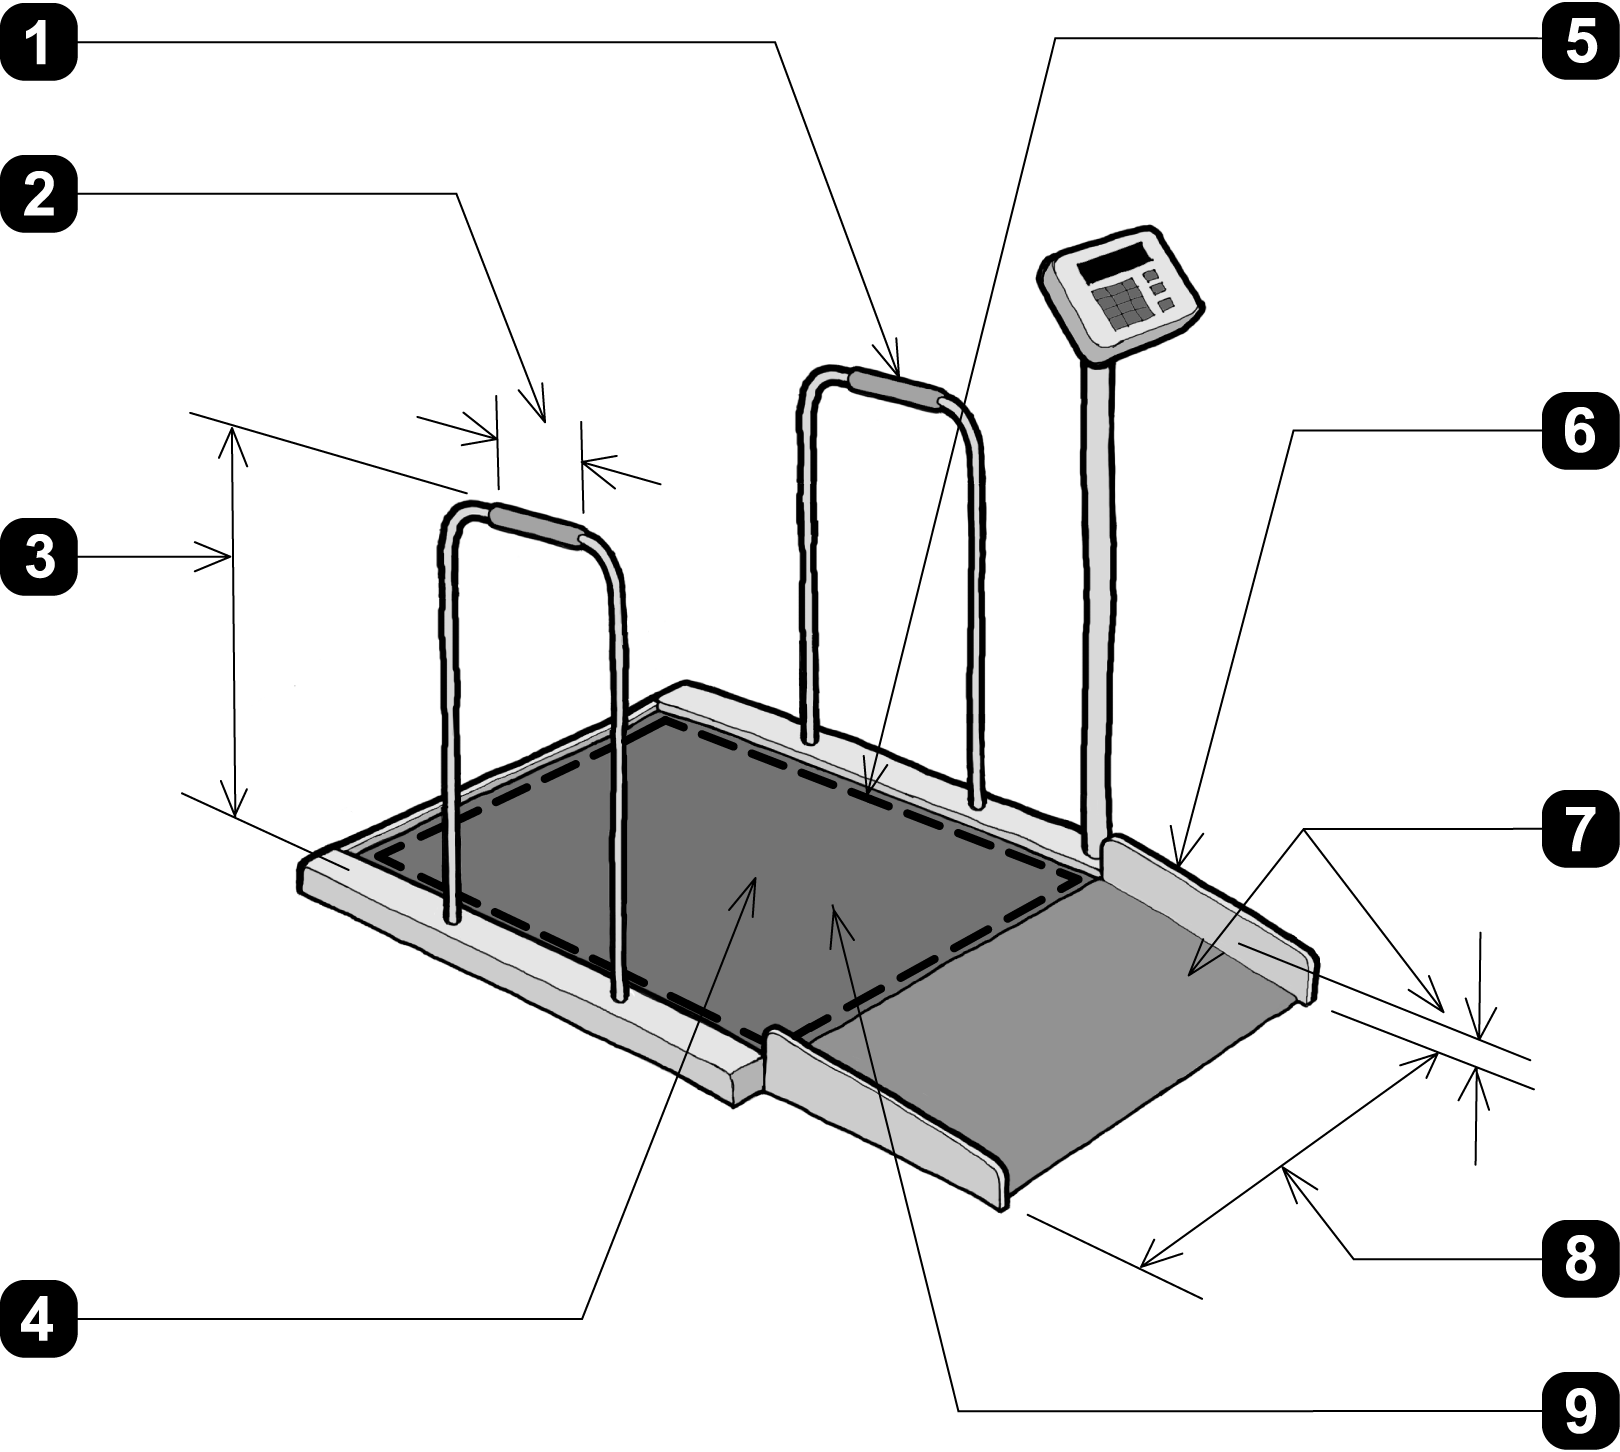 Three-dimensional view of a weight scale with a raised platform showing features and minimum dimensions required by the proposed Standards.